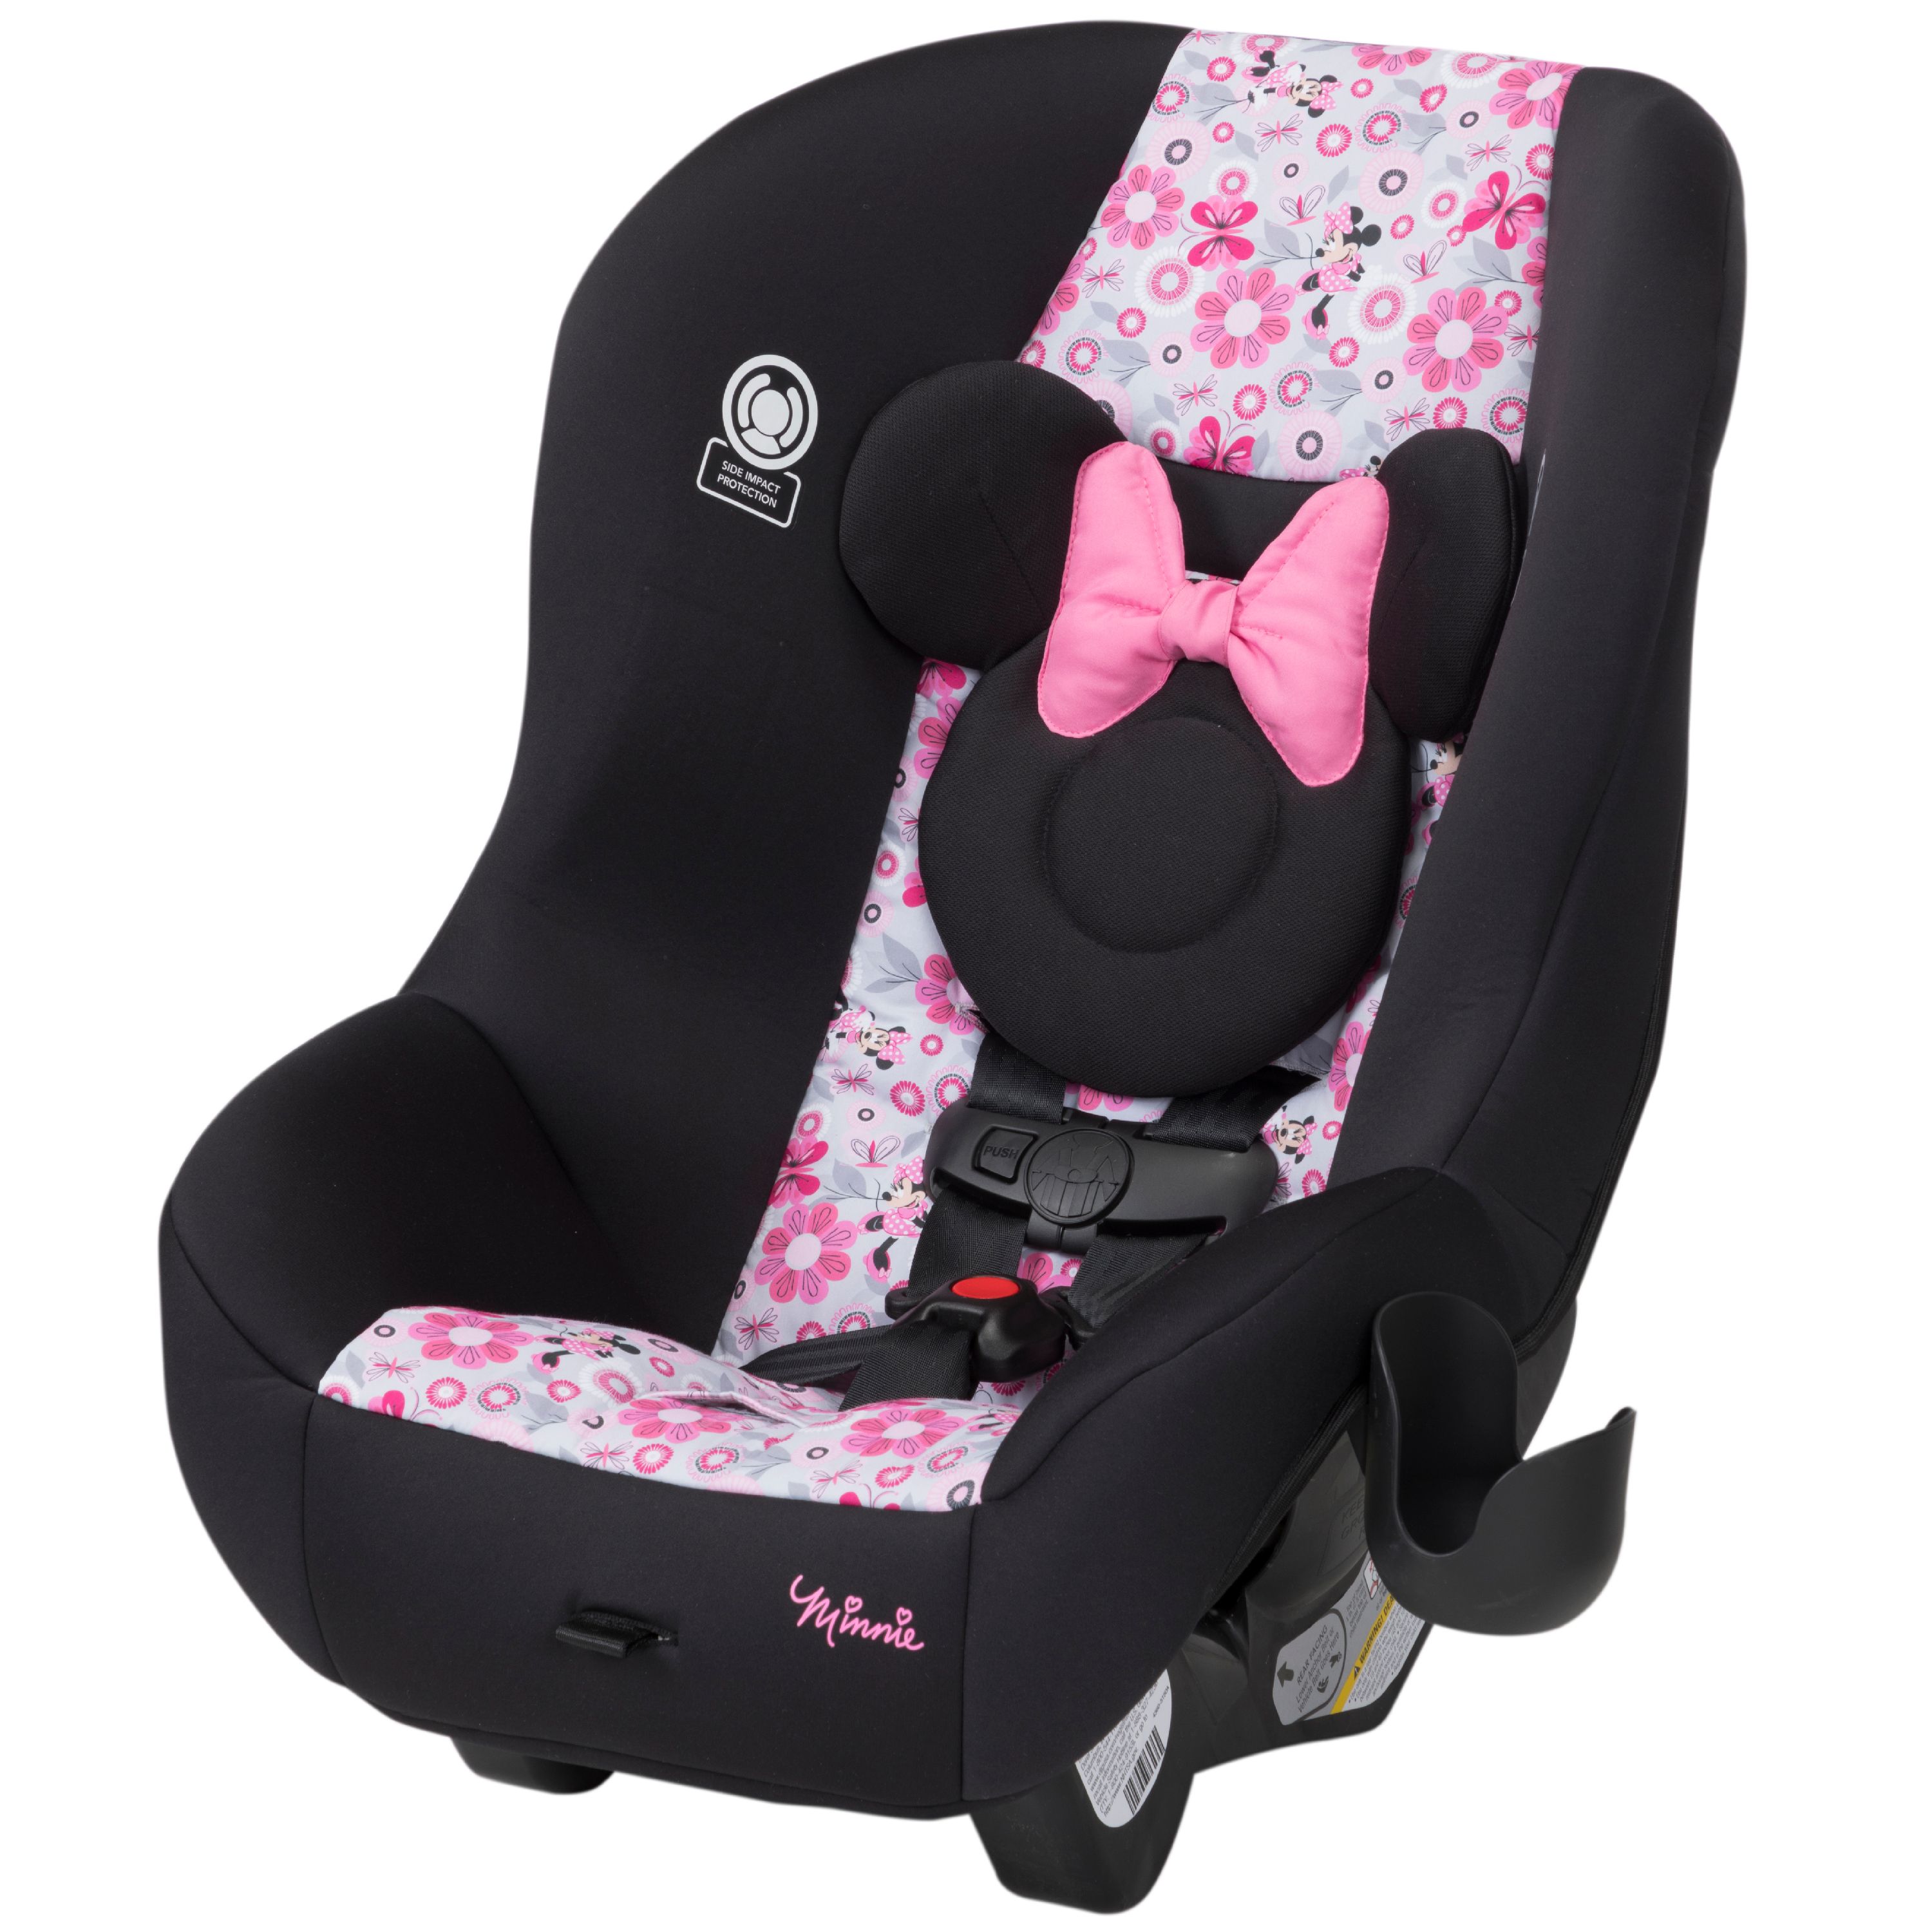 Disney Baby Scenera NEXT Luxe Convertible Car Seat, Minnie Meadow - image 1 of 15